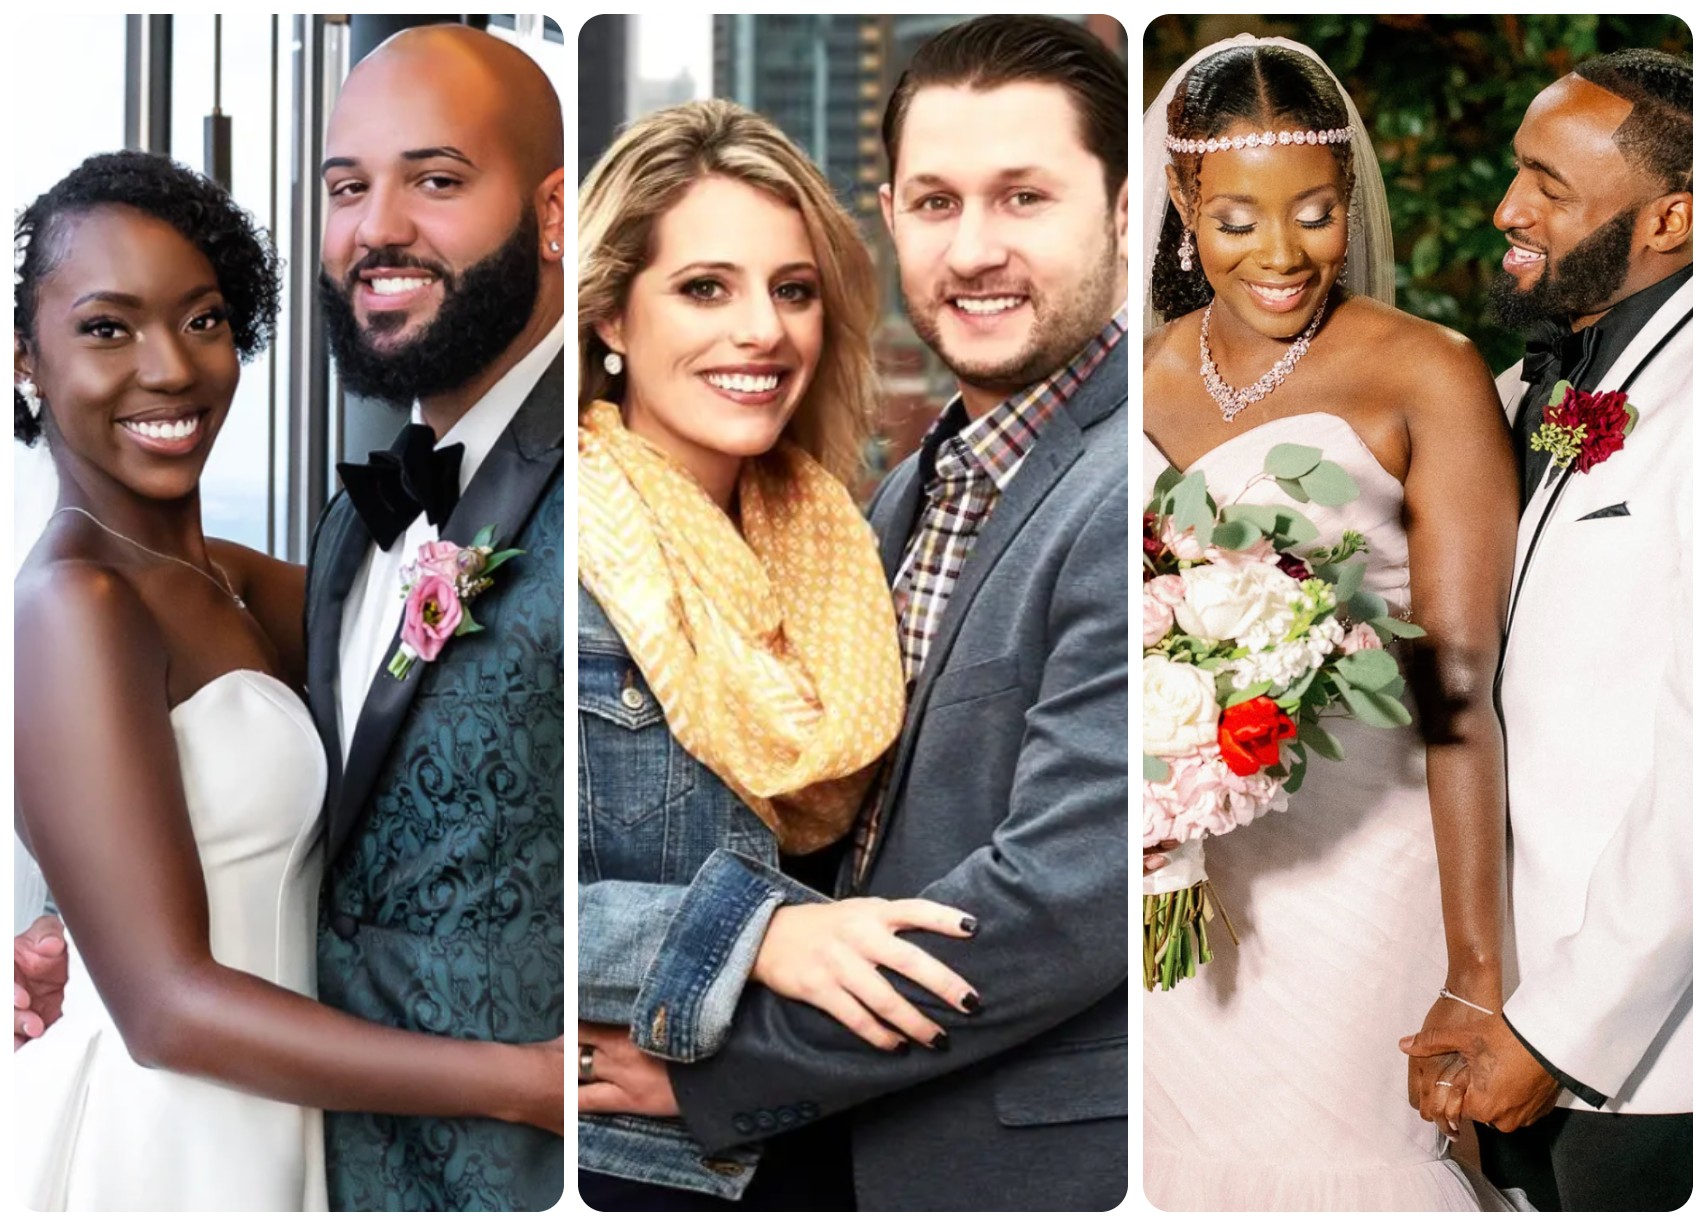 Which Married at First Sight Couples Are Still Together?